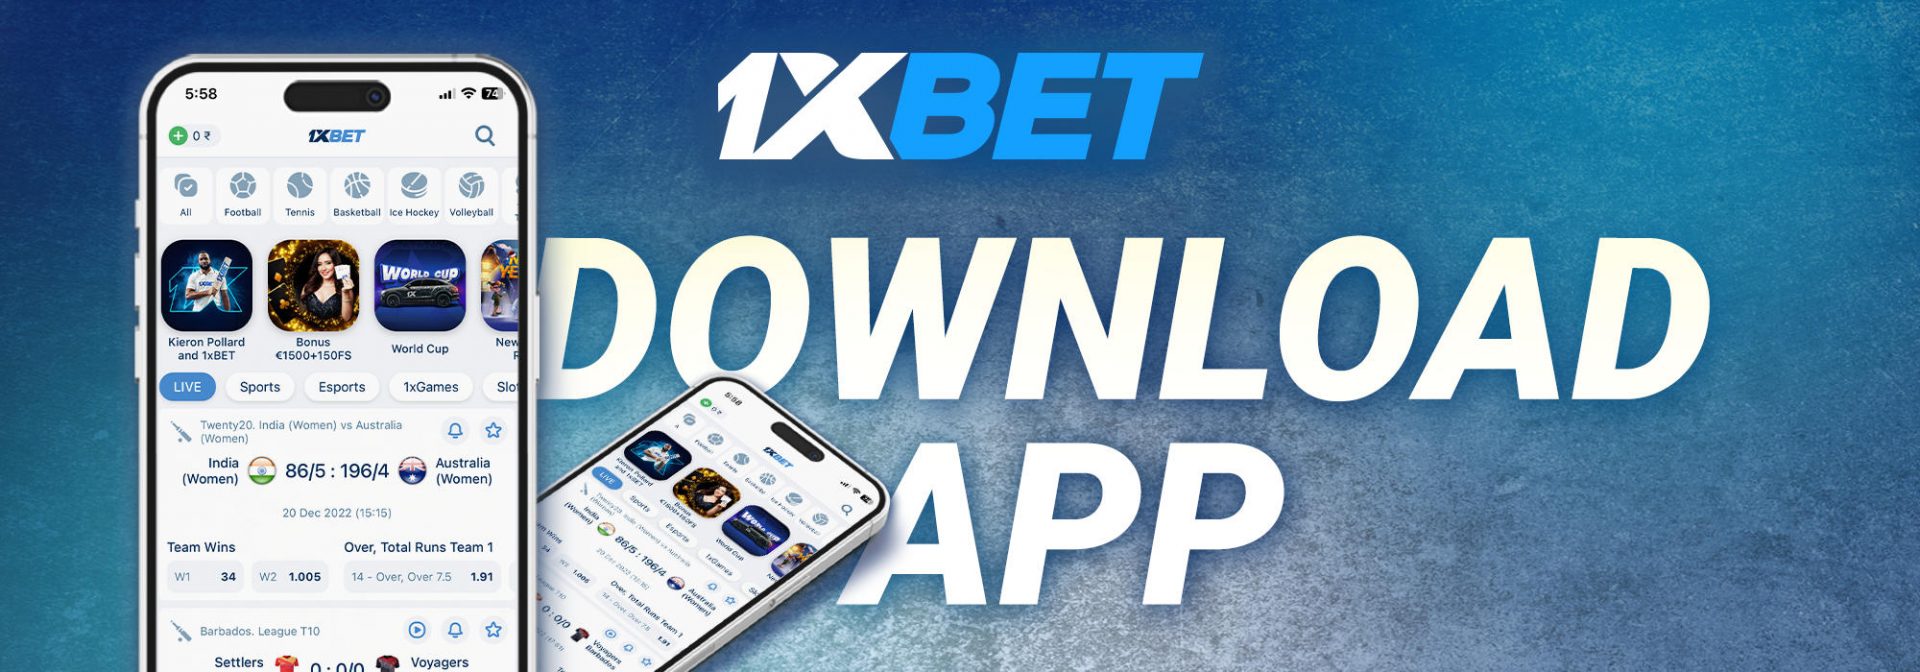 10 Secret Things You Didn't Know About 1xbet สล็อต